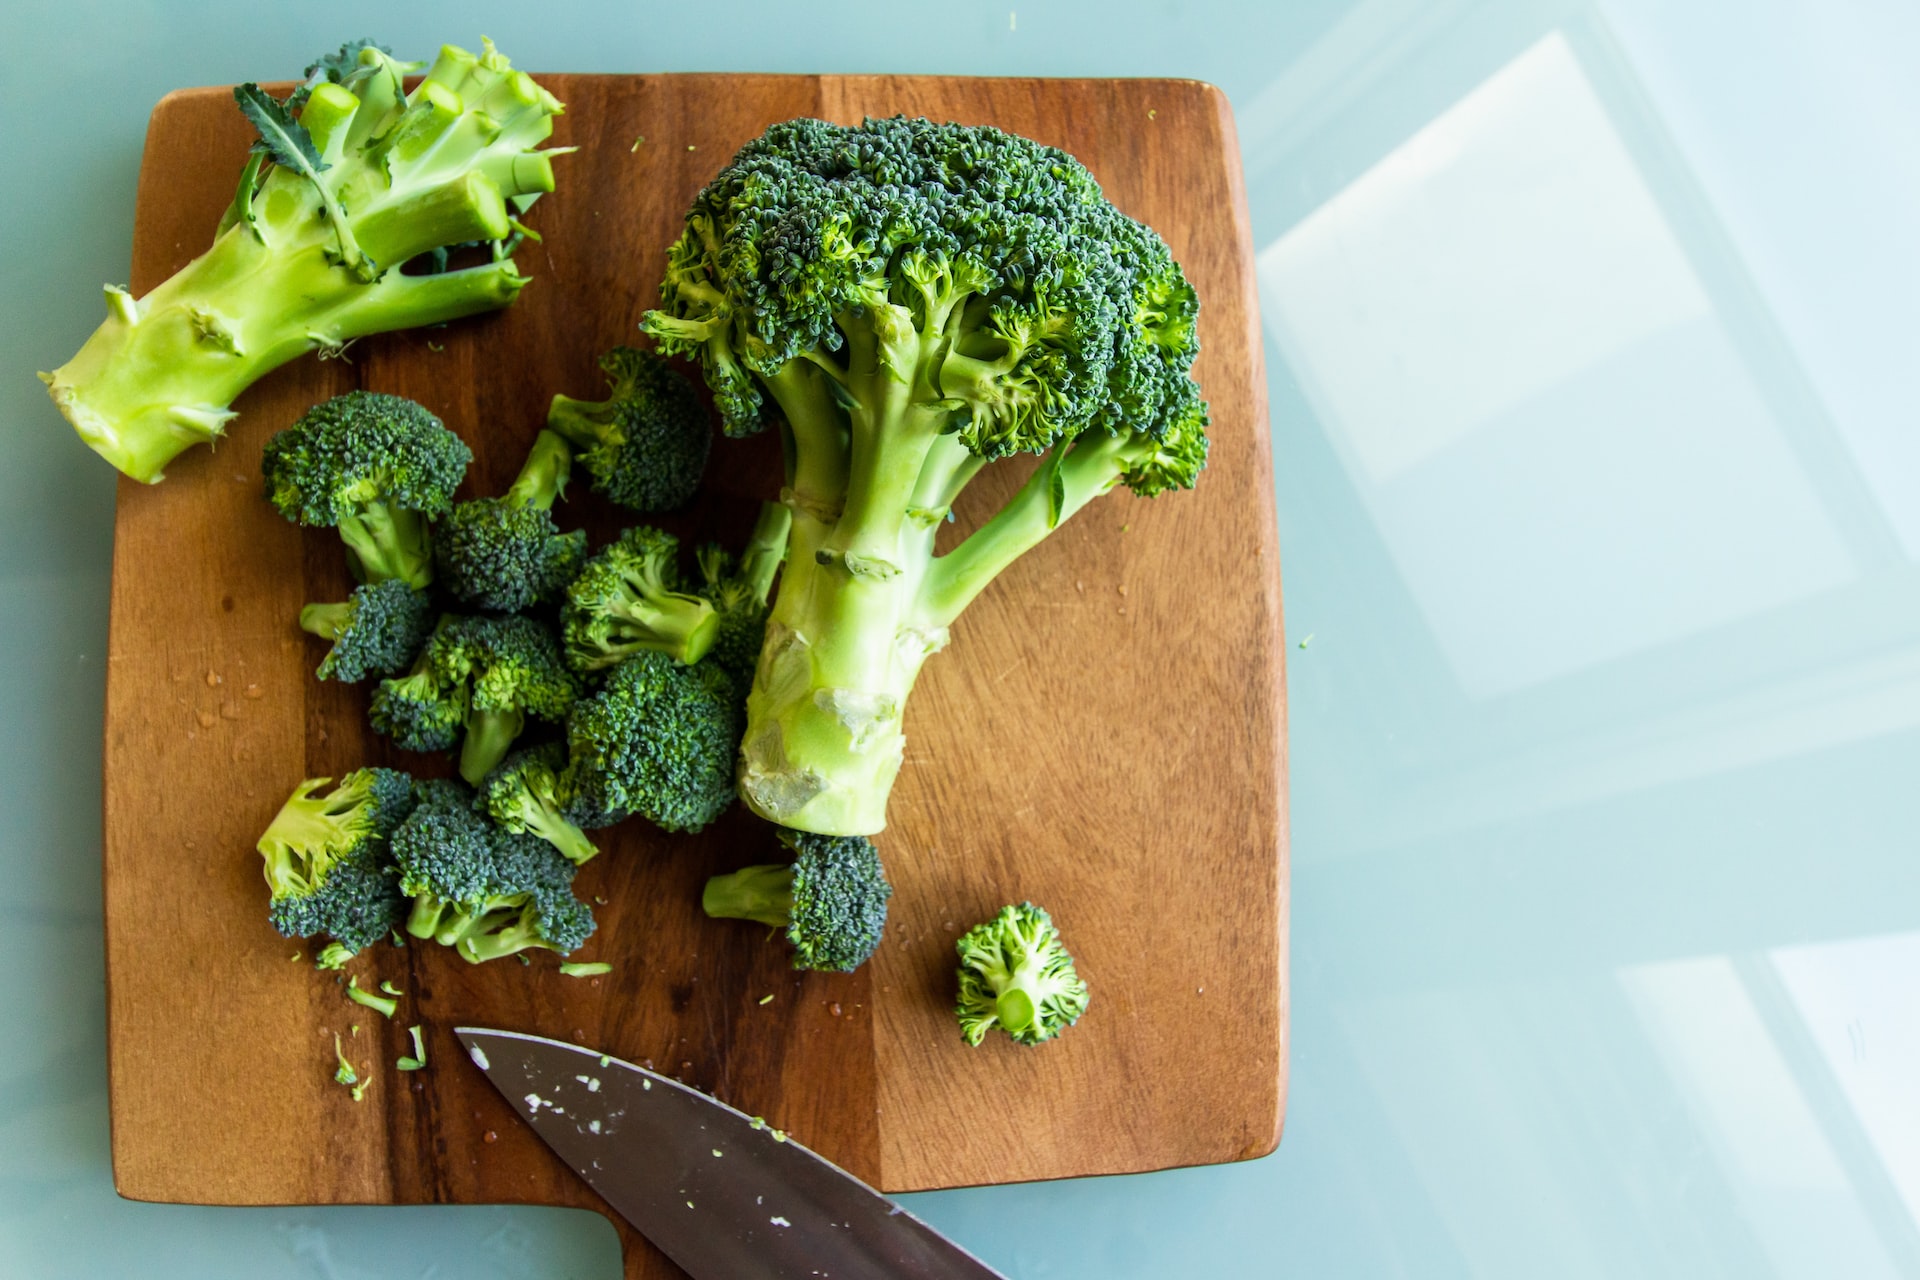 Cauliflower Vs. Broccoli. What's the Difference?